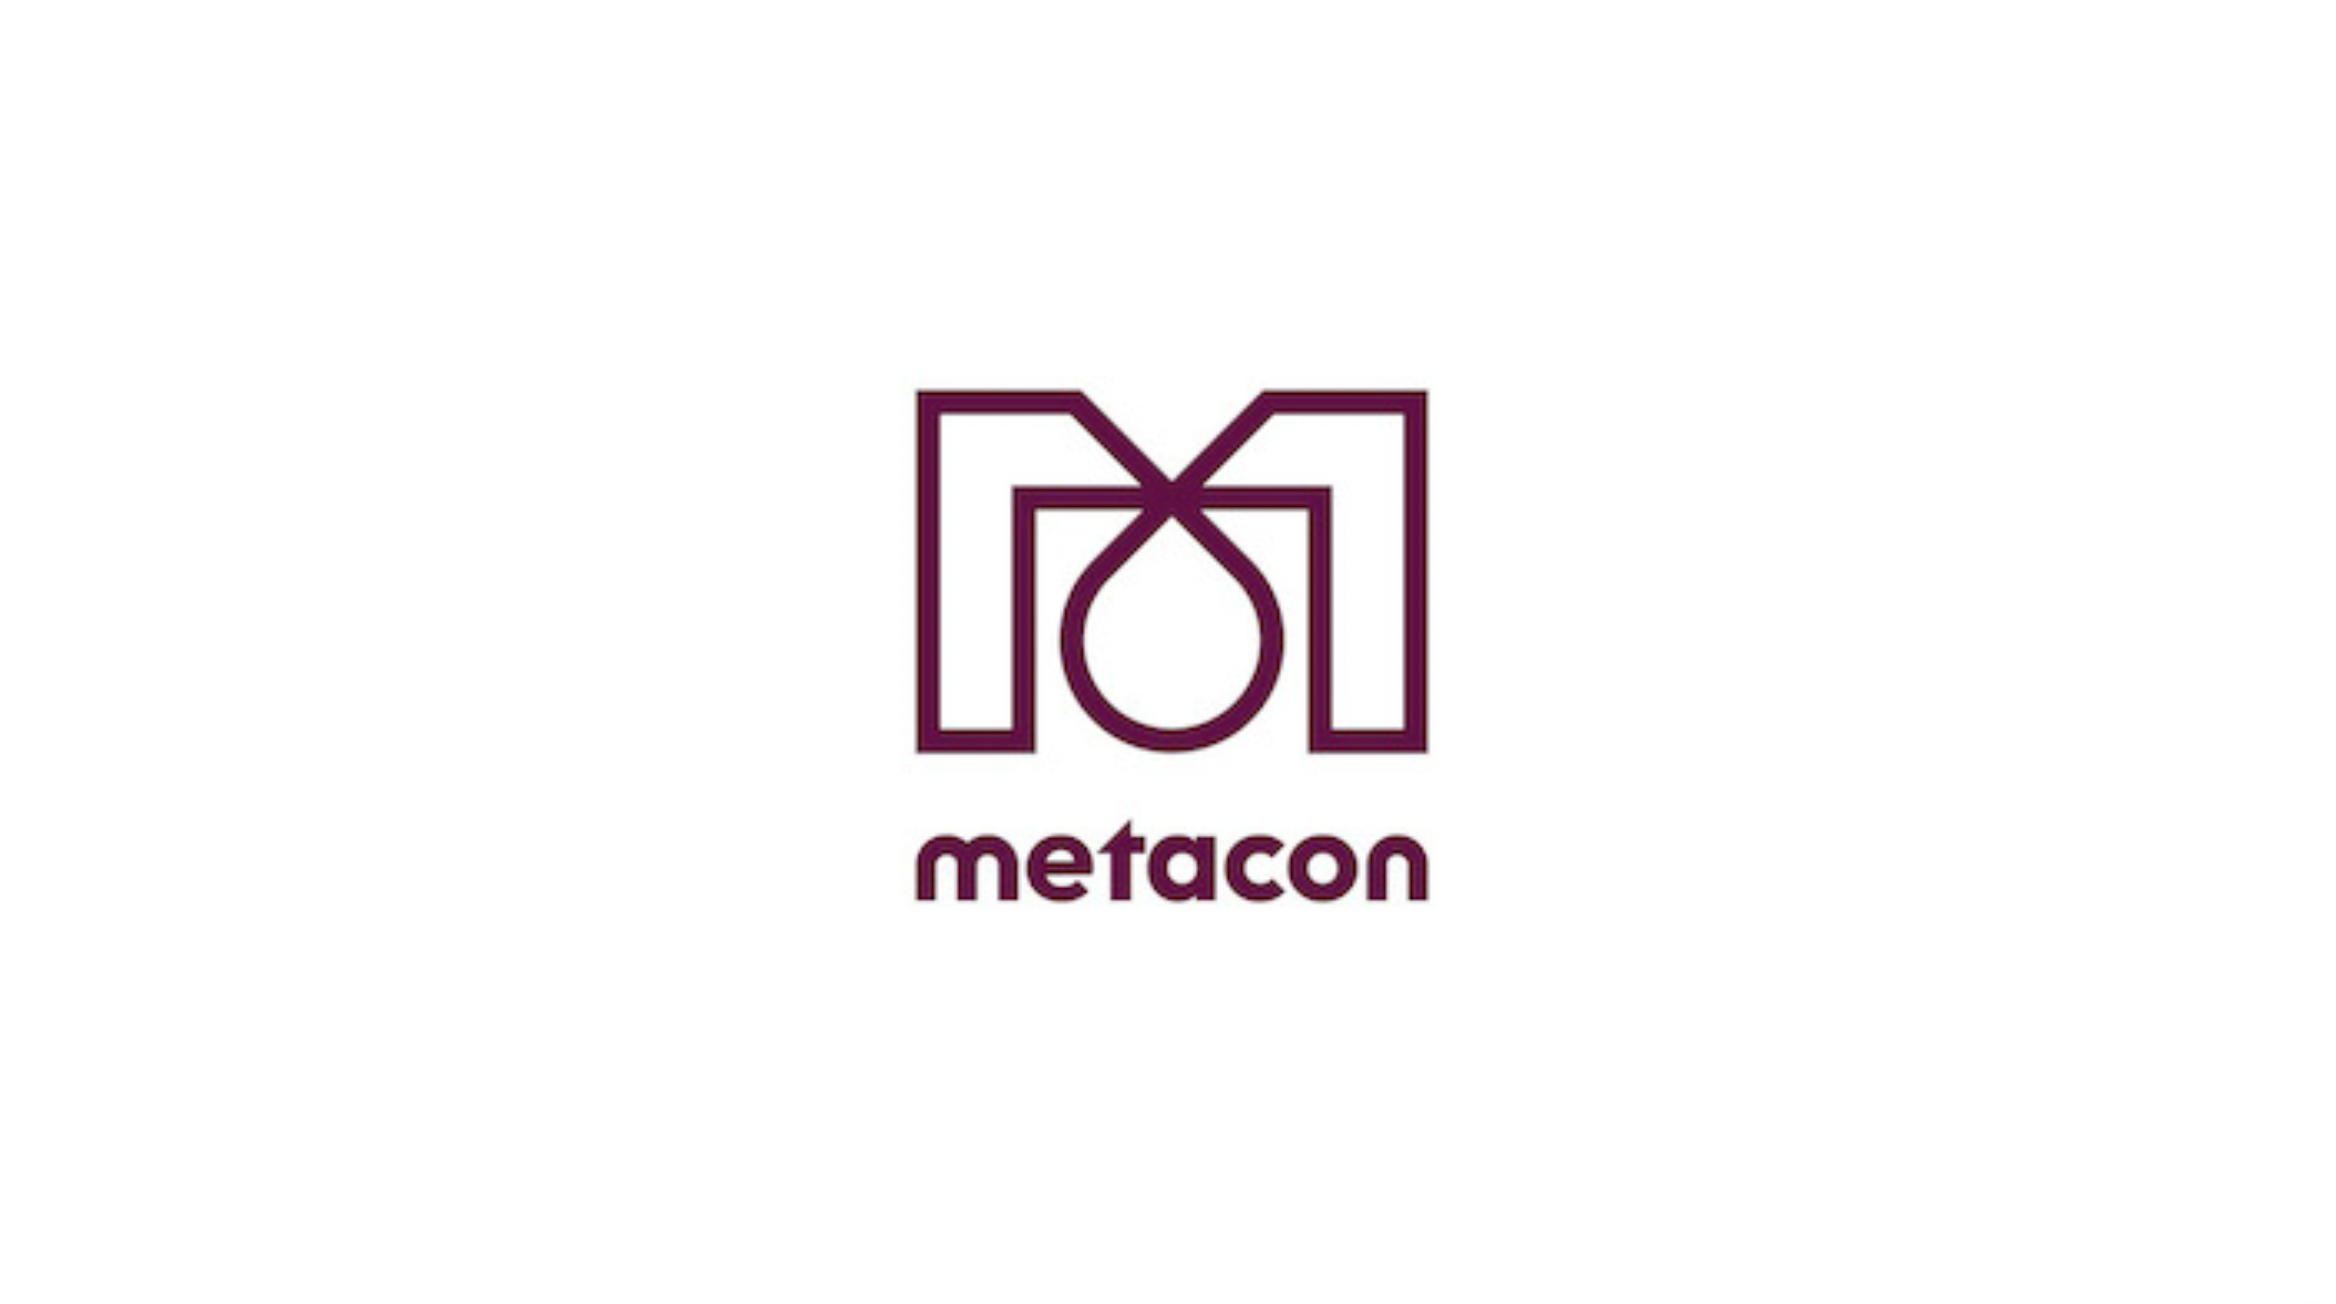 Metacon has entered into an exclusive license agreement with PERIC